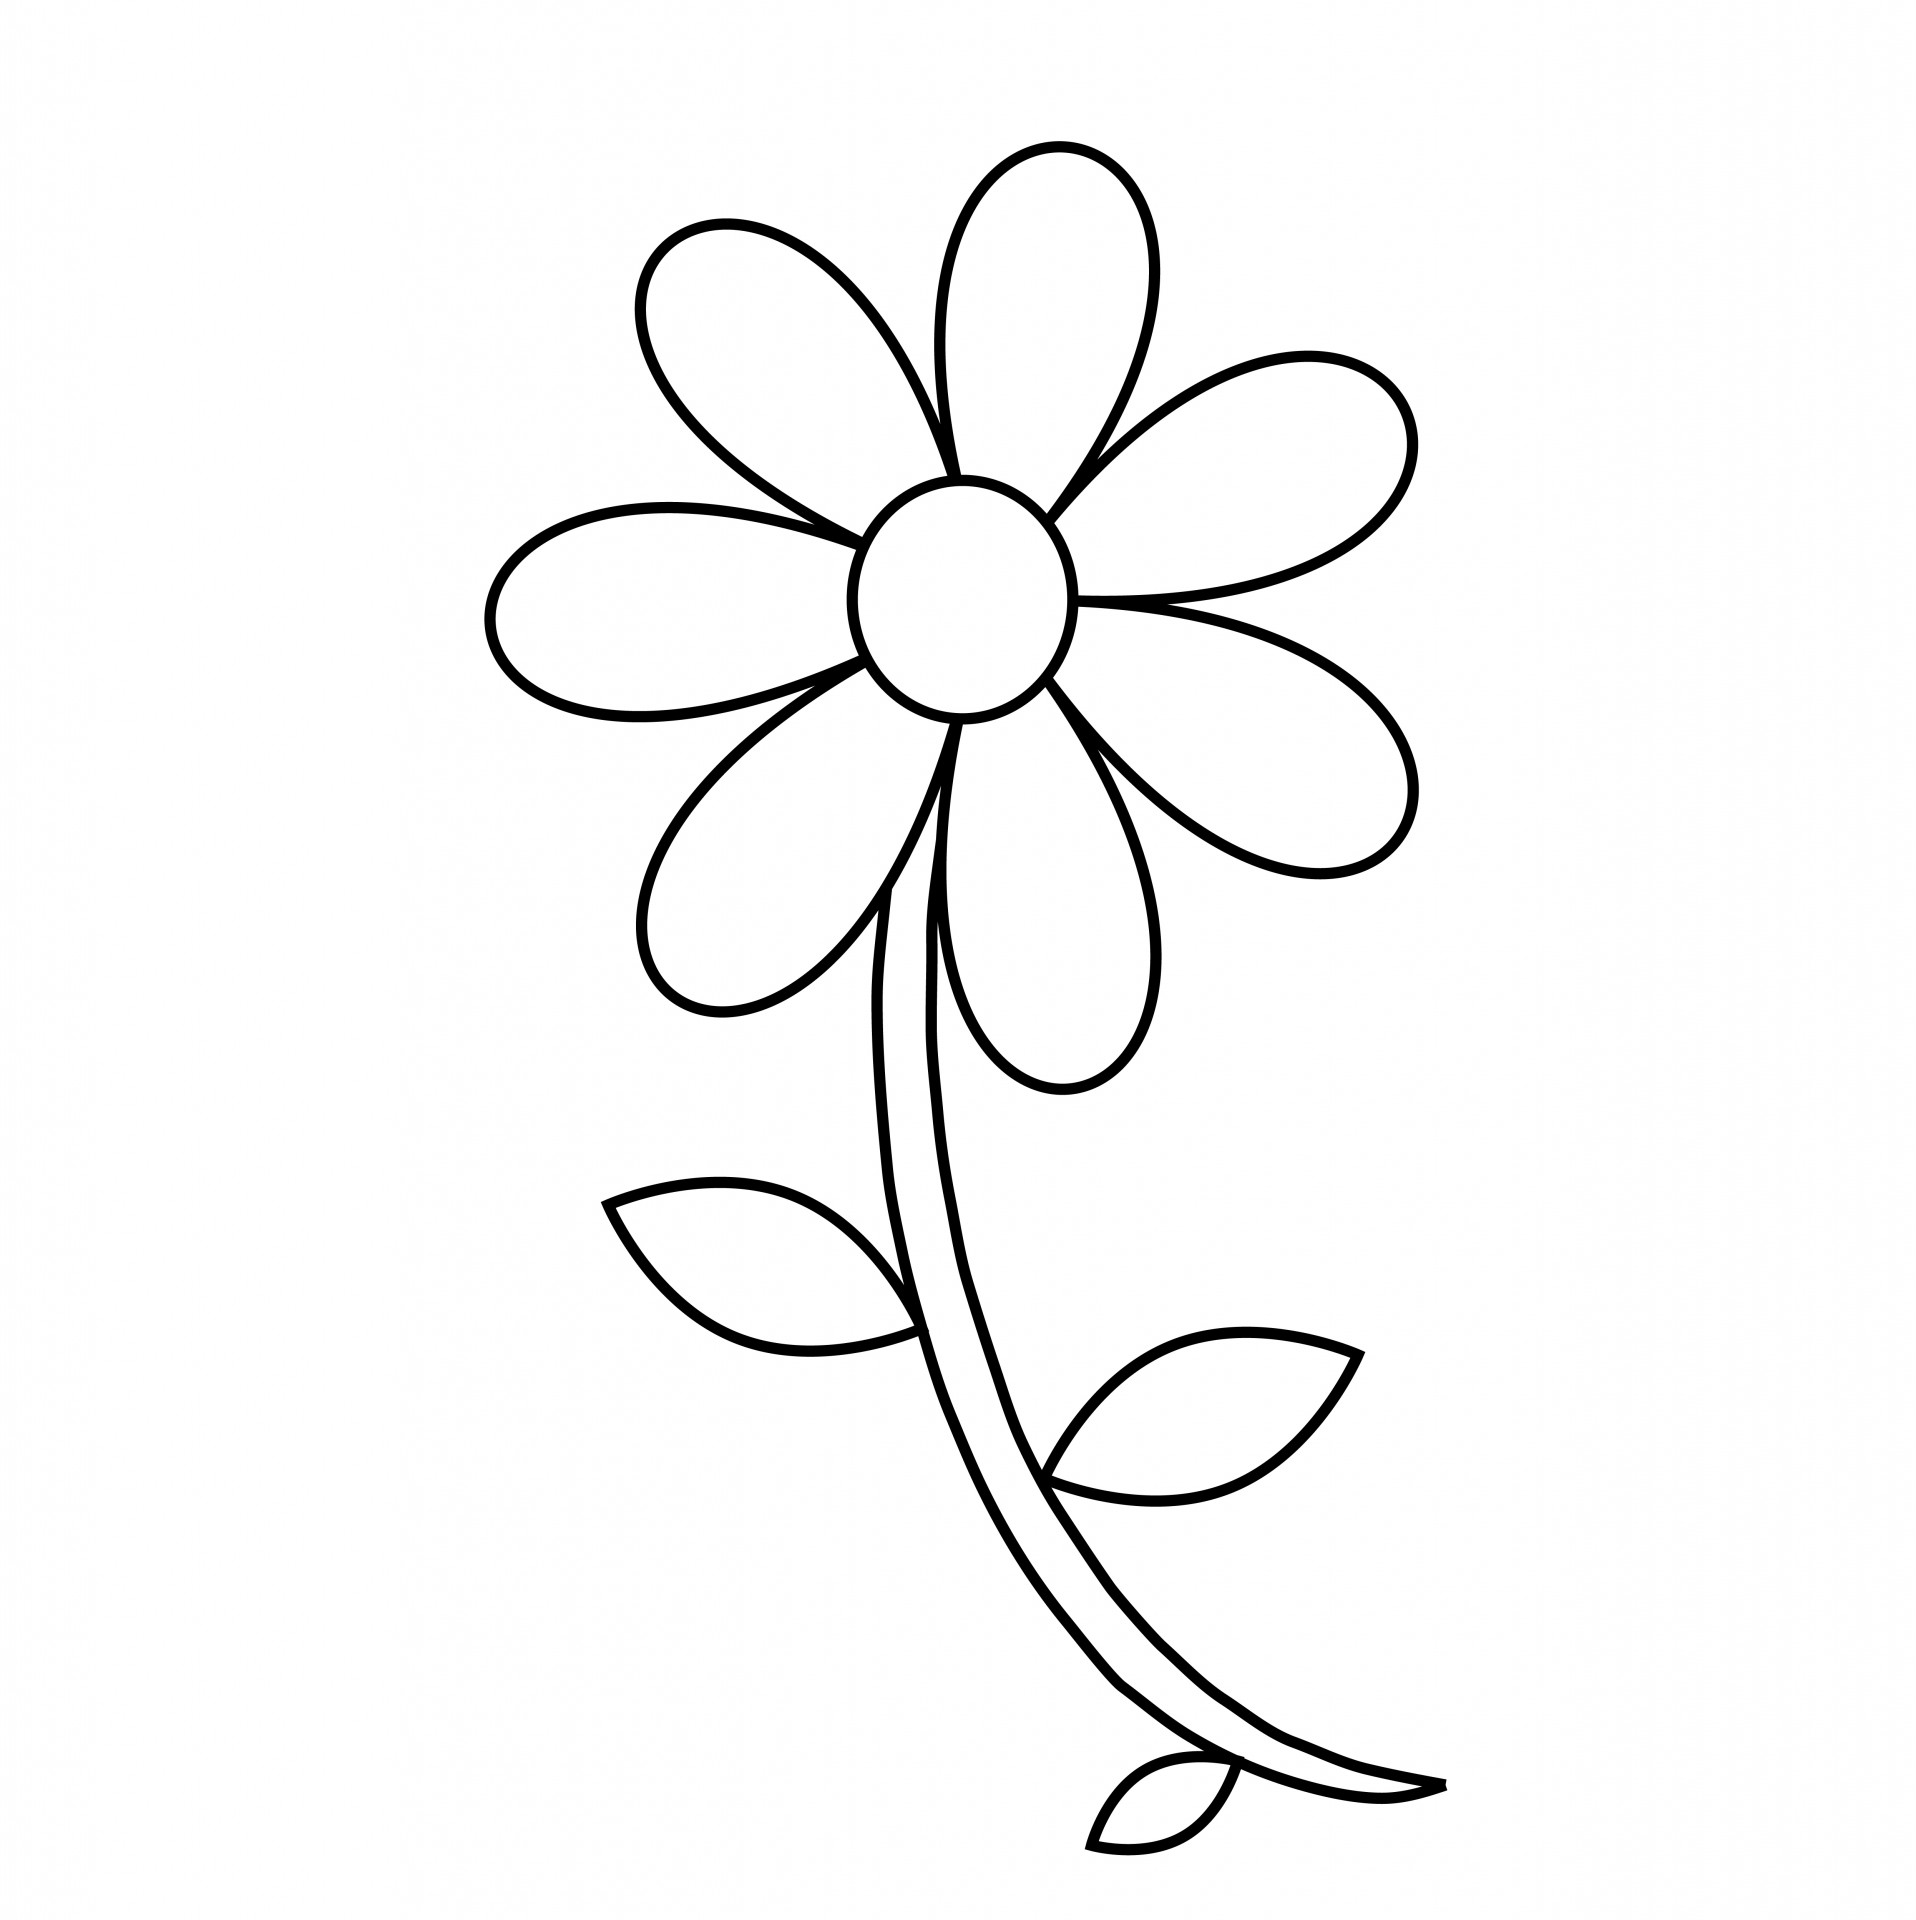 Daisy clipart printable. Free flower outline download